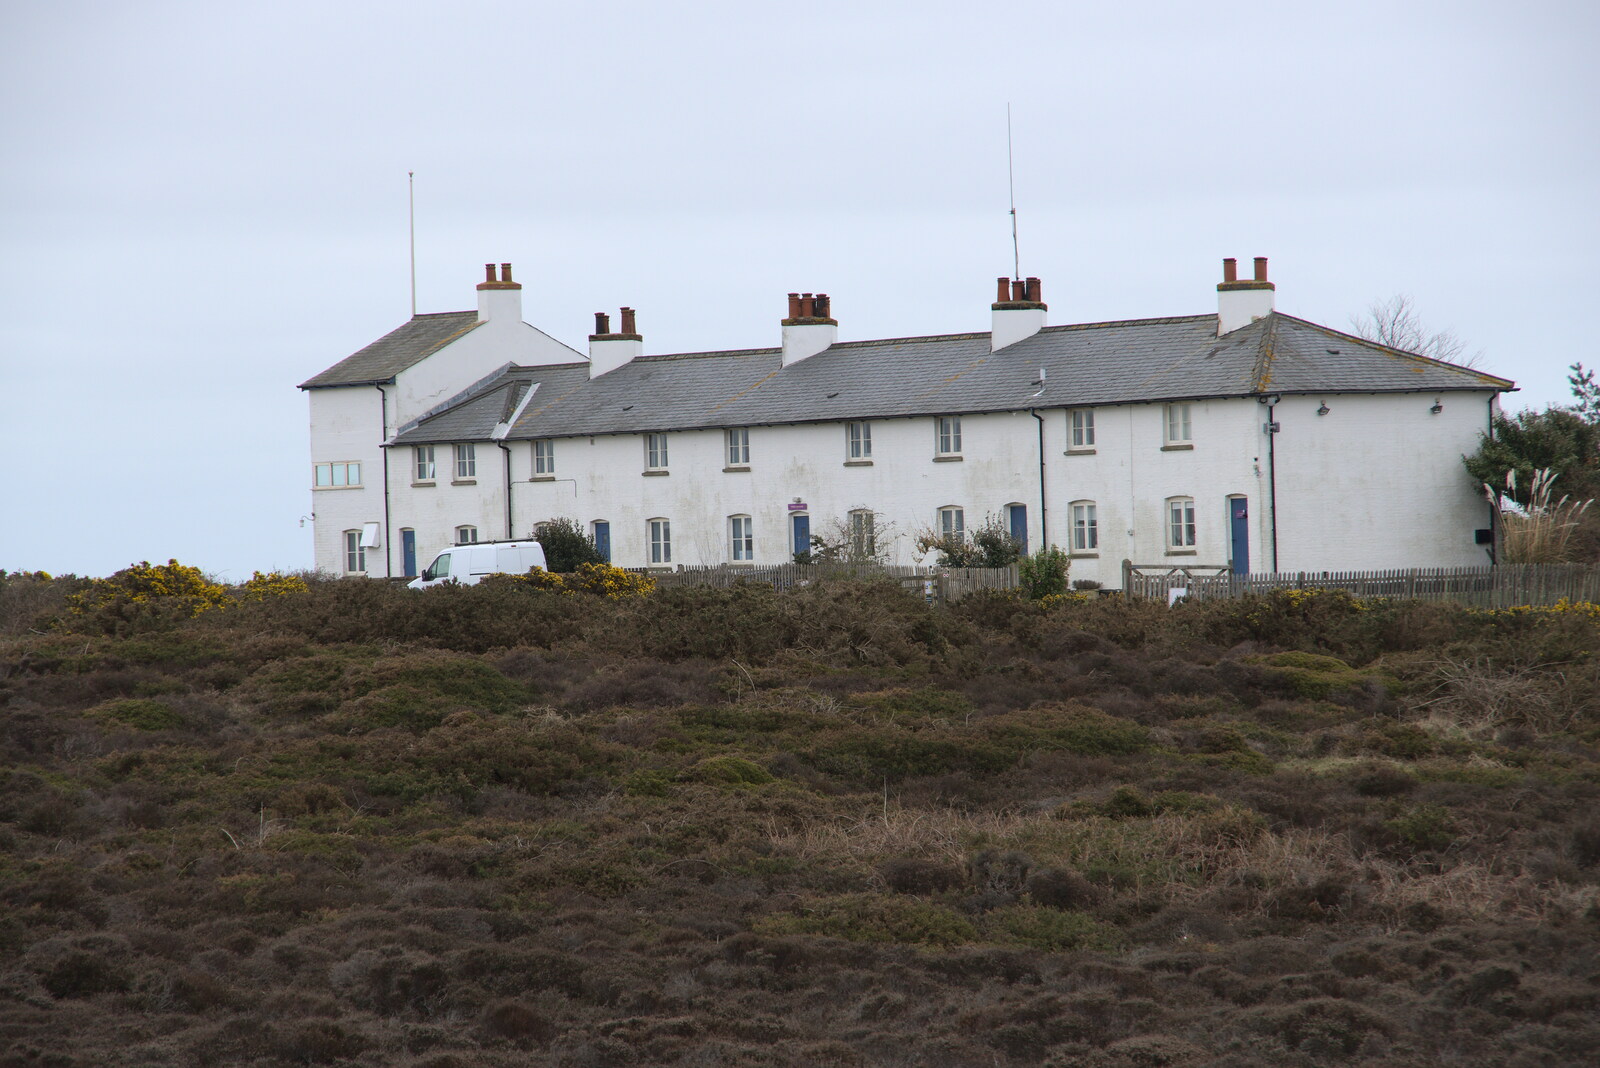 The coastguard house and lookout from A Trip to Dunwich Beach, Dunwich, Suffolk - 2nd April 2021